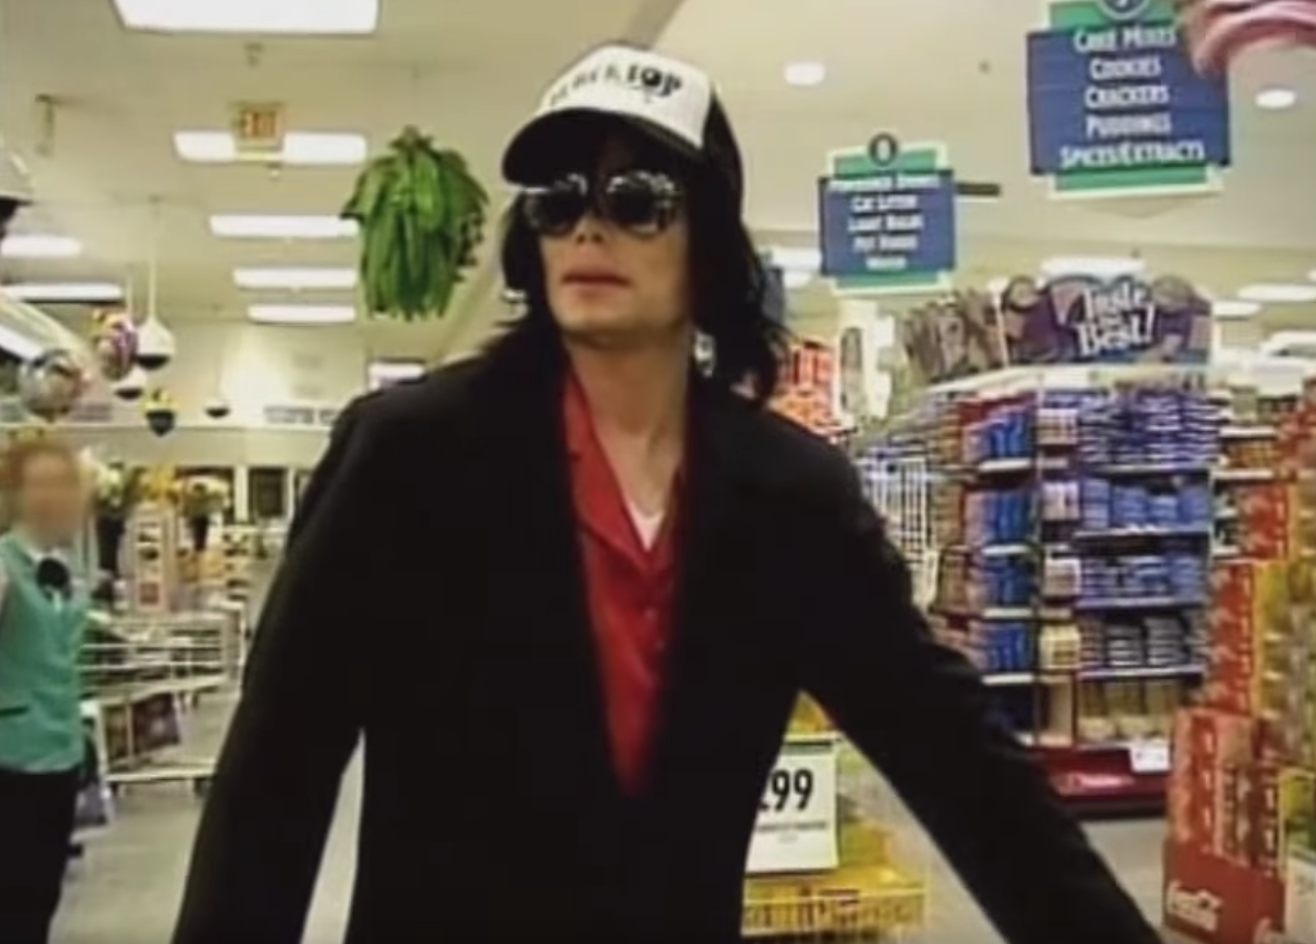 A supermarket was closed down so that Michael Jackson could fulfill his dream to go to a supermarket and shop like everybody else.